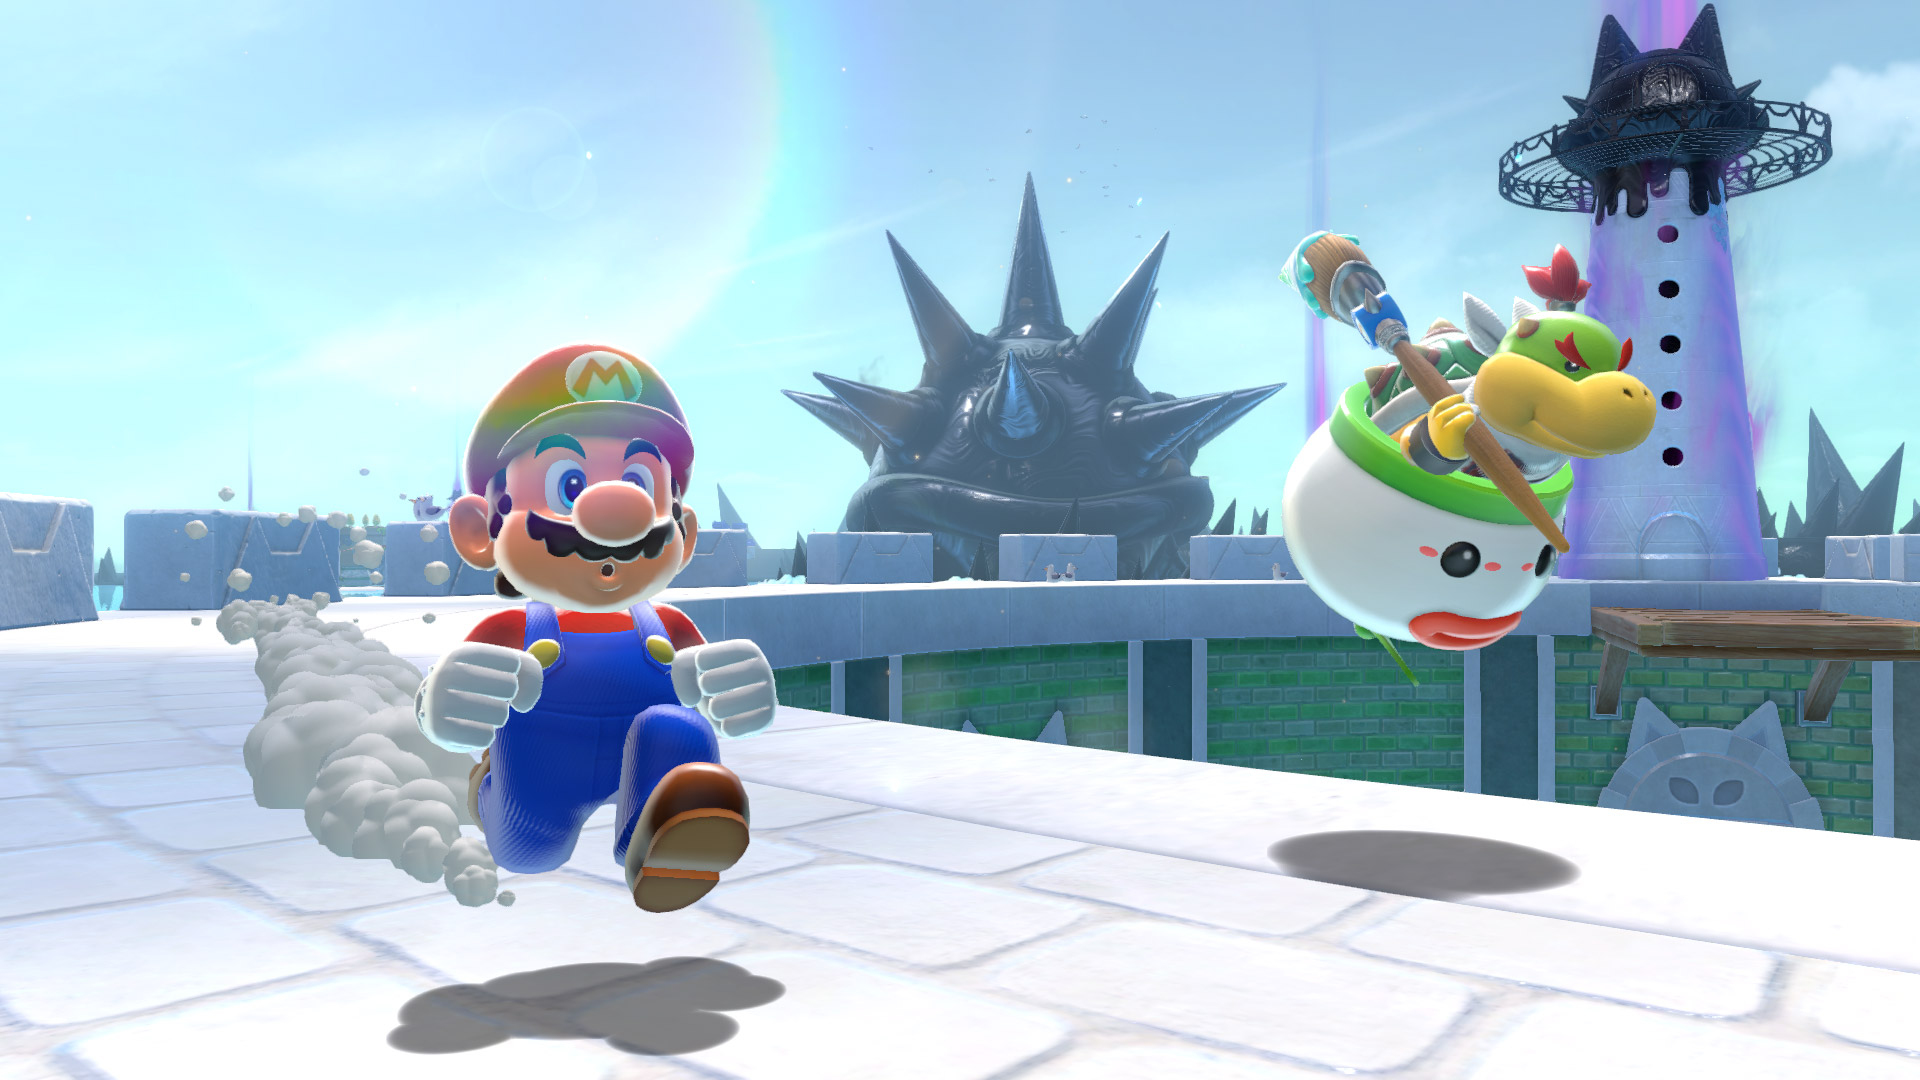 Mario and Bowser Jr running in Super Mario 3D World + Bowser's Fury